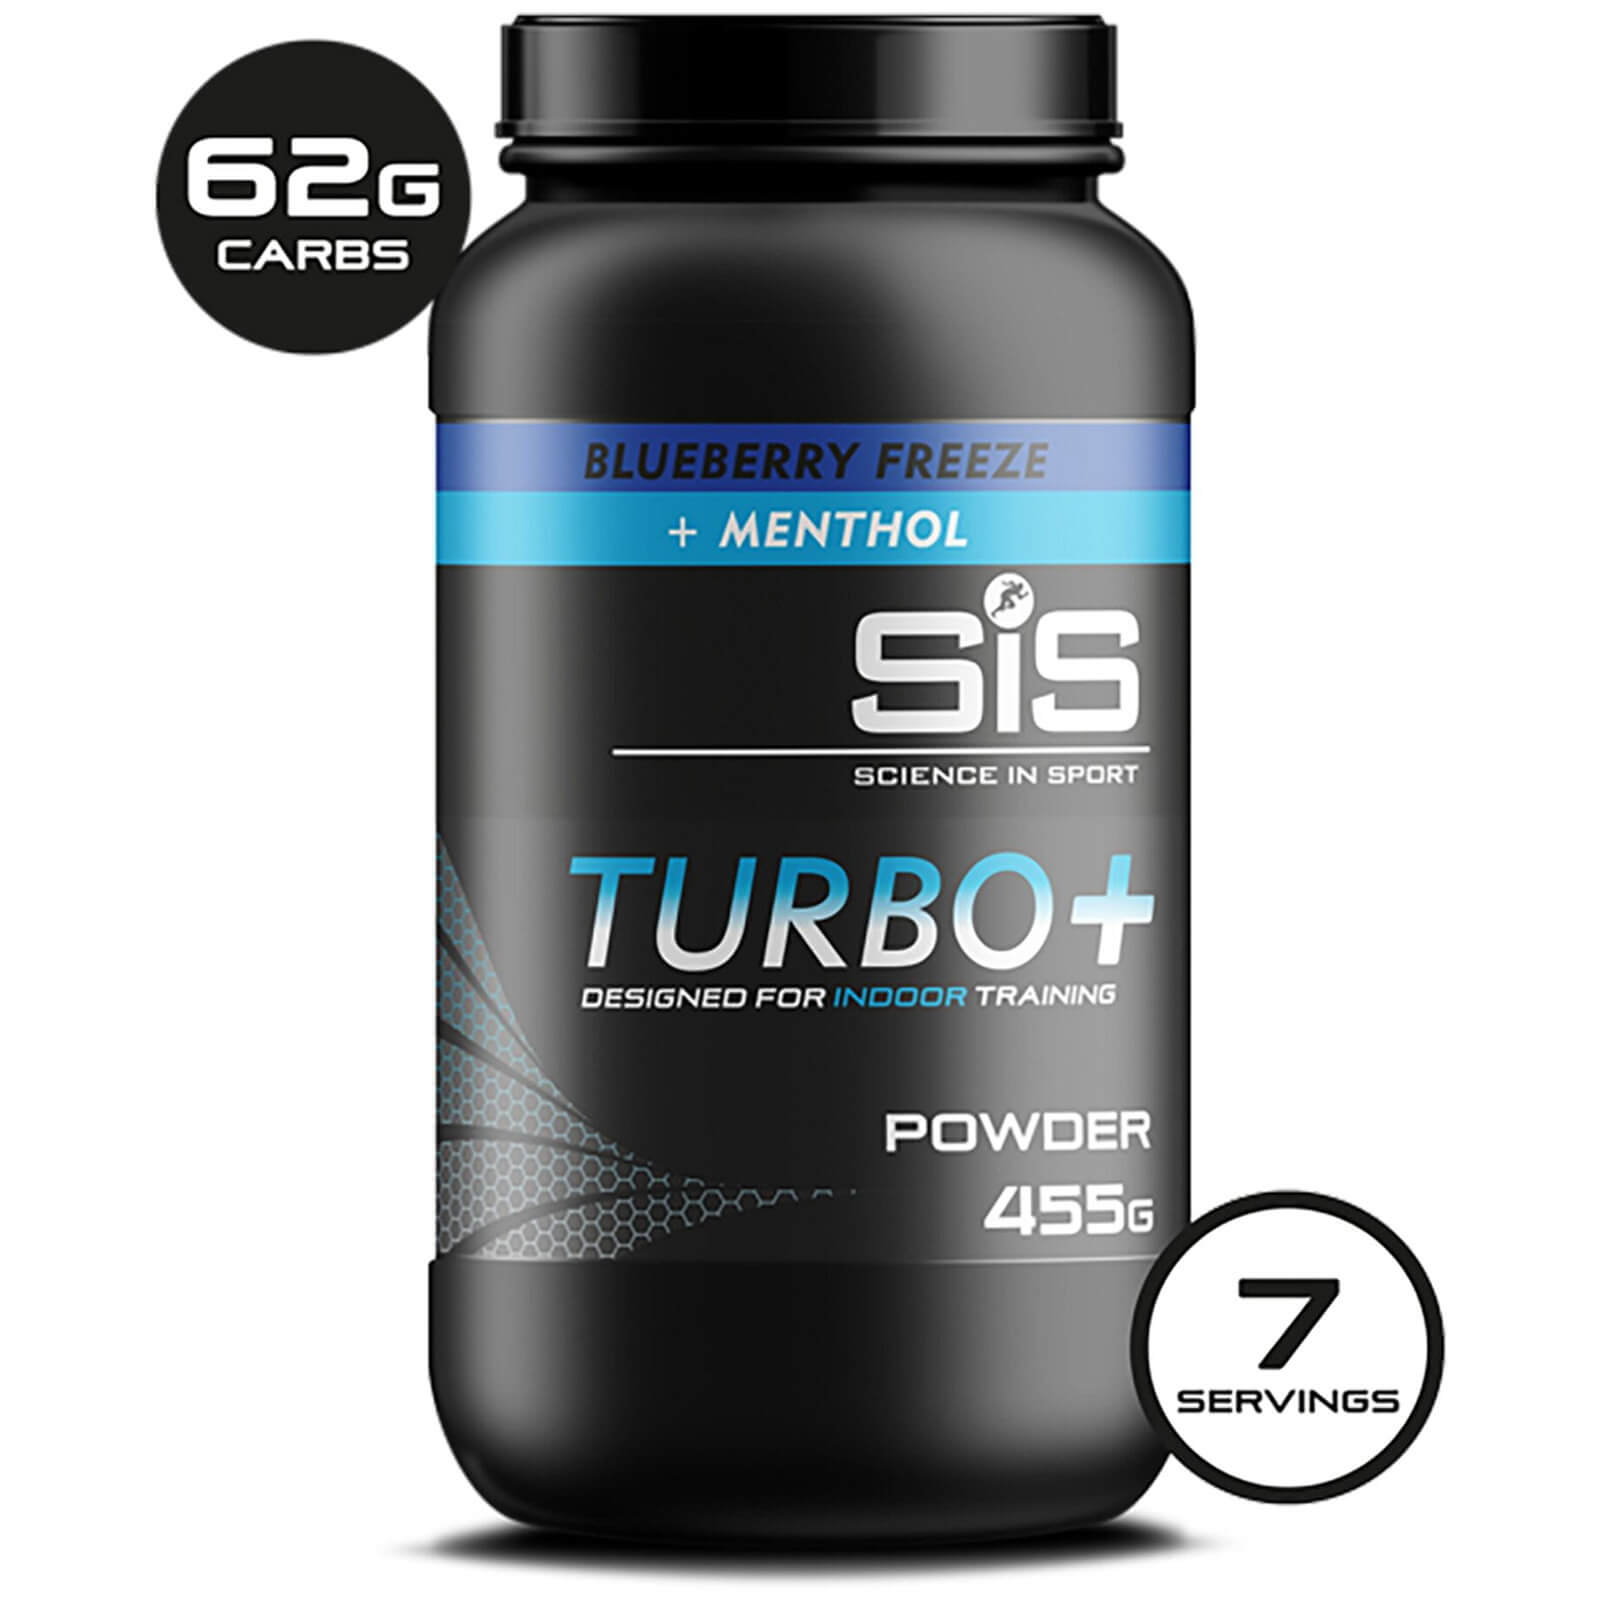 Science in Sport Turbo+ Energy Drink Powder 455g Tub - Blueberry Freeze